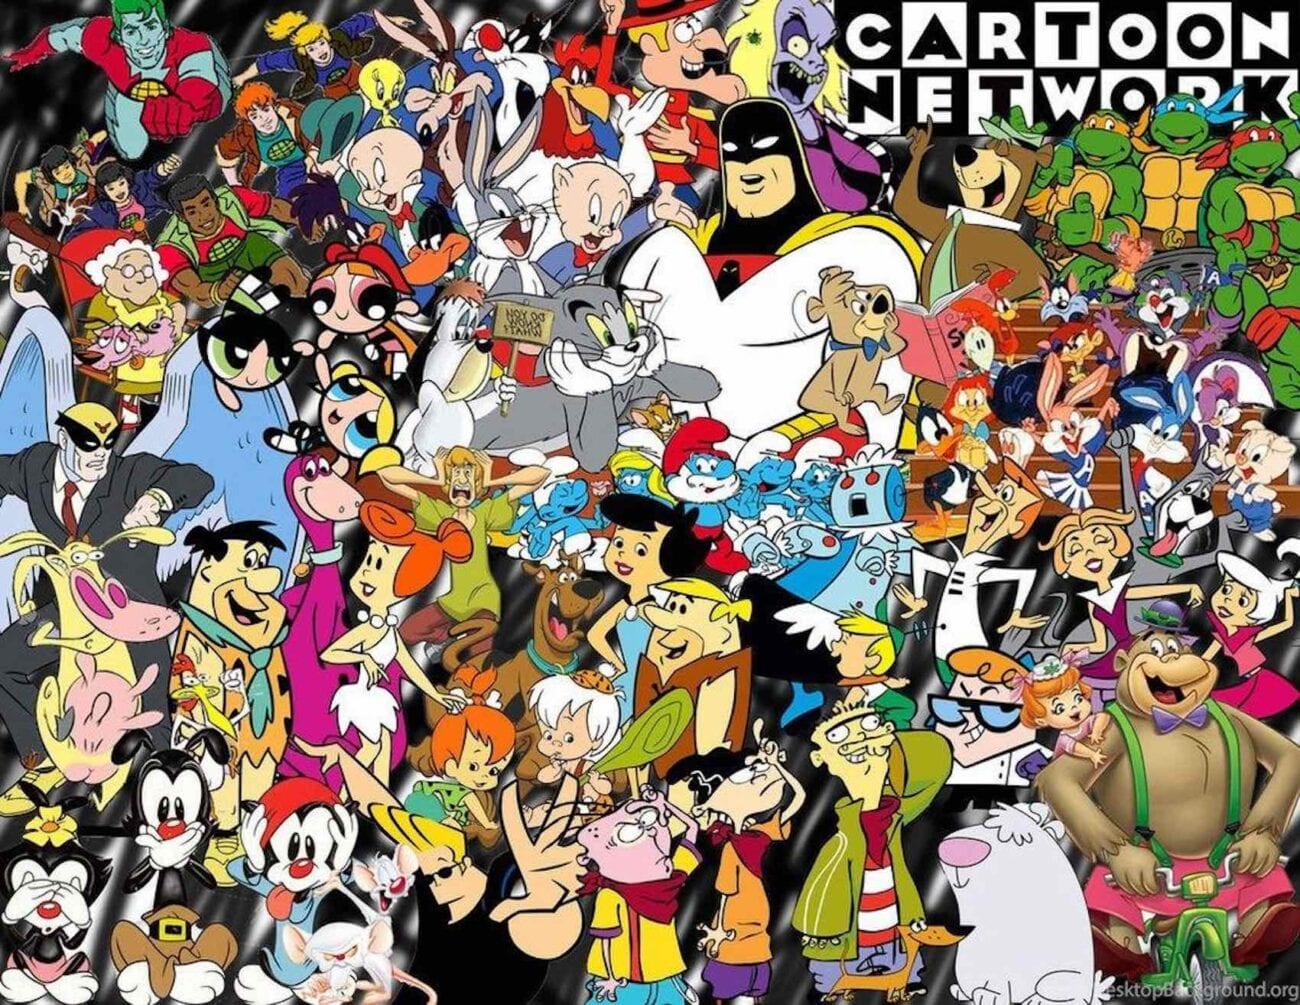 Old Cartoon Network Shows List With Pictures - BEST GAMES WALKTHROUGH